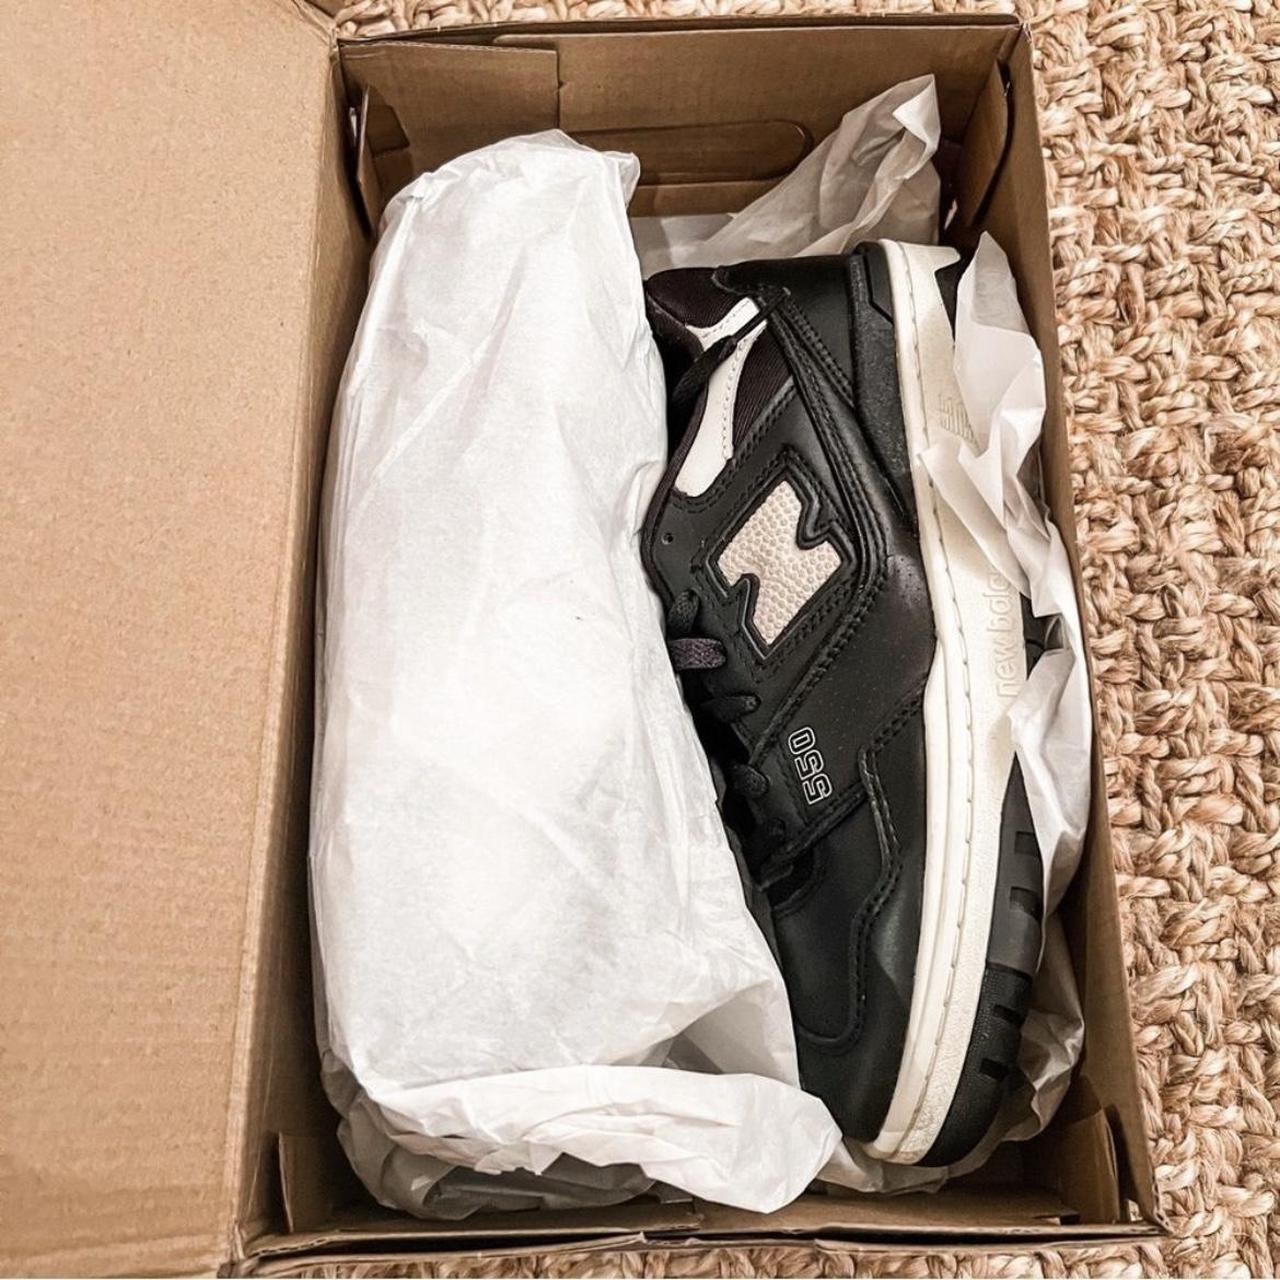 New Balance Women's Black and White Trainers (3)